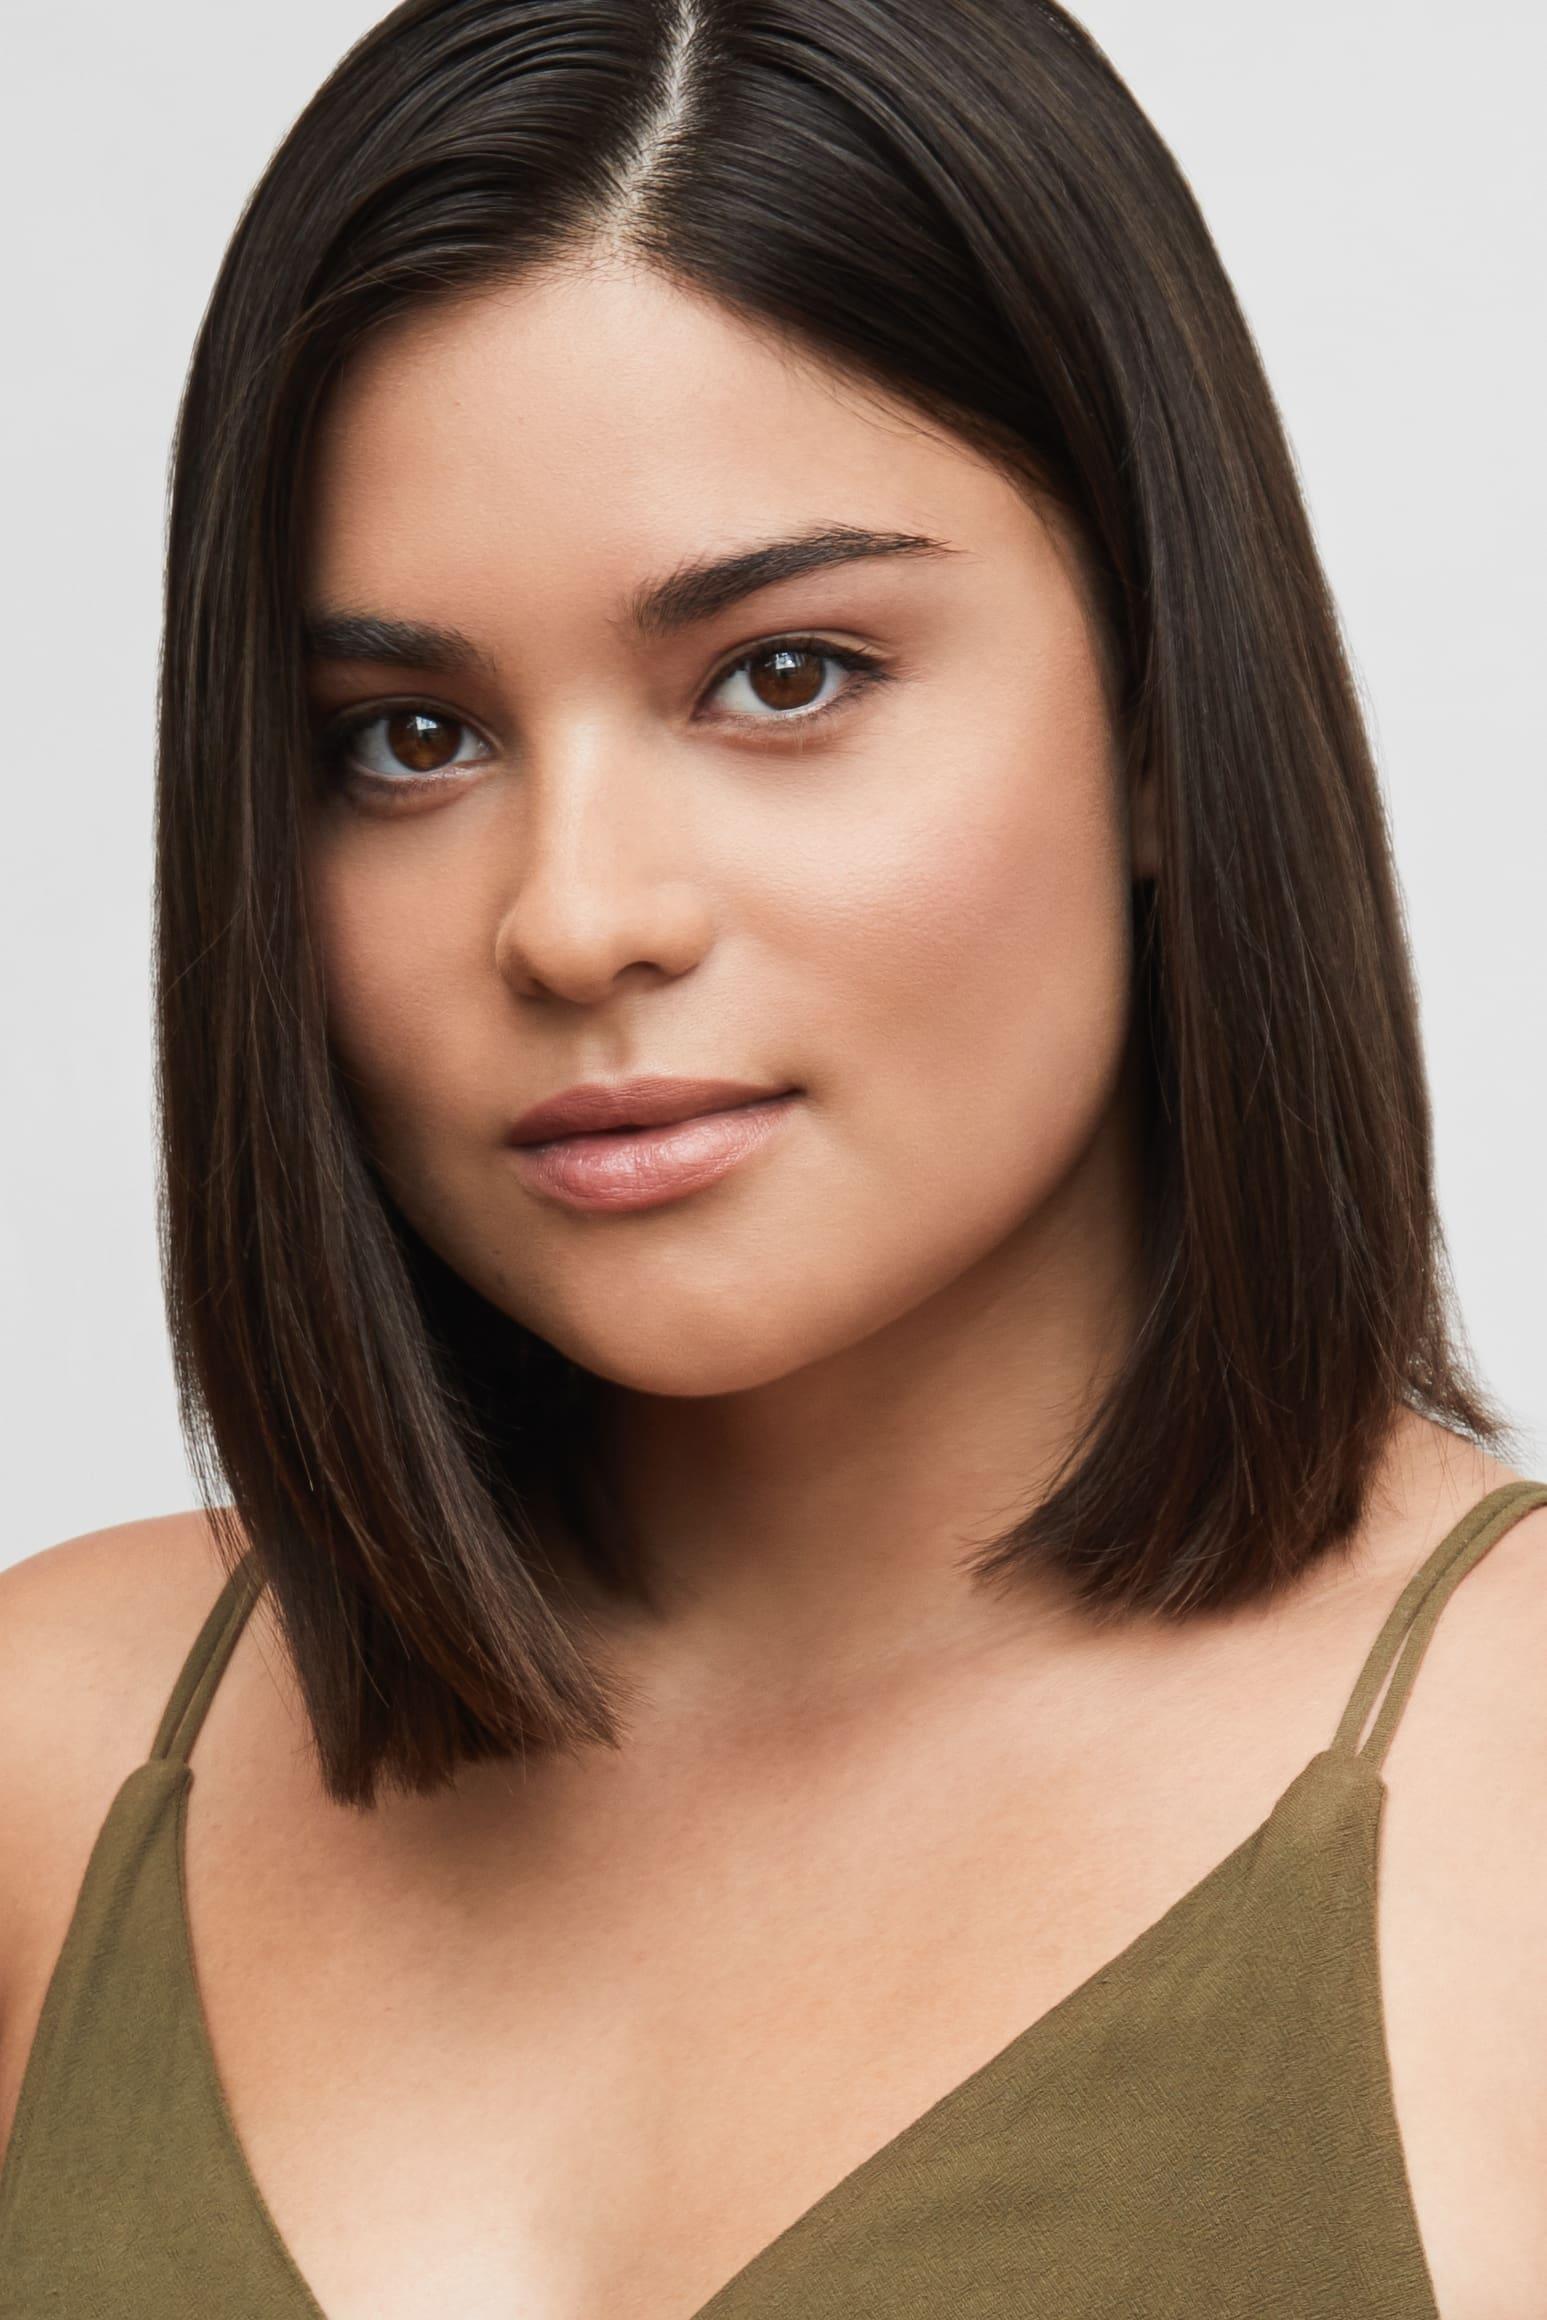 Devery Jacobs | Daisy